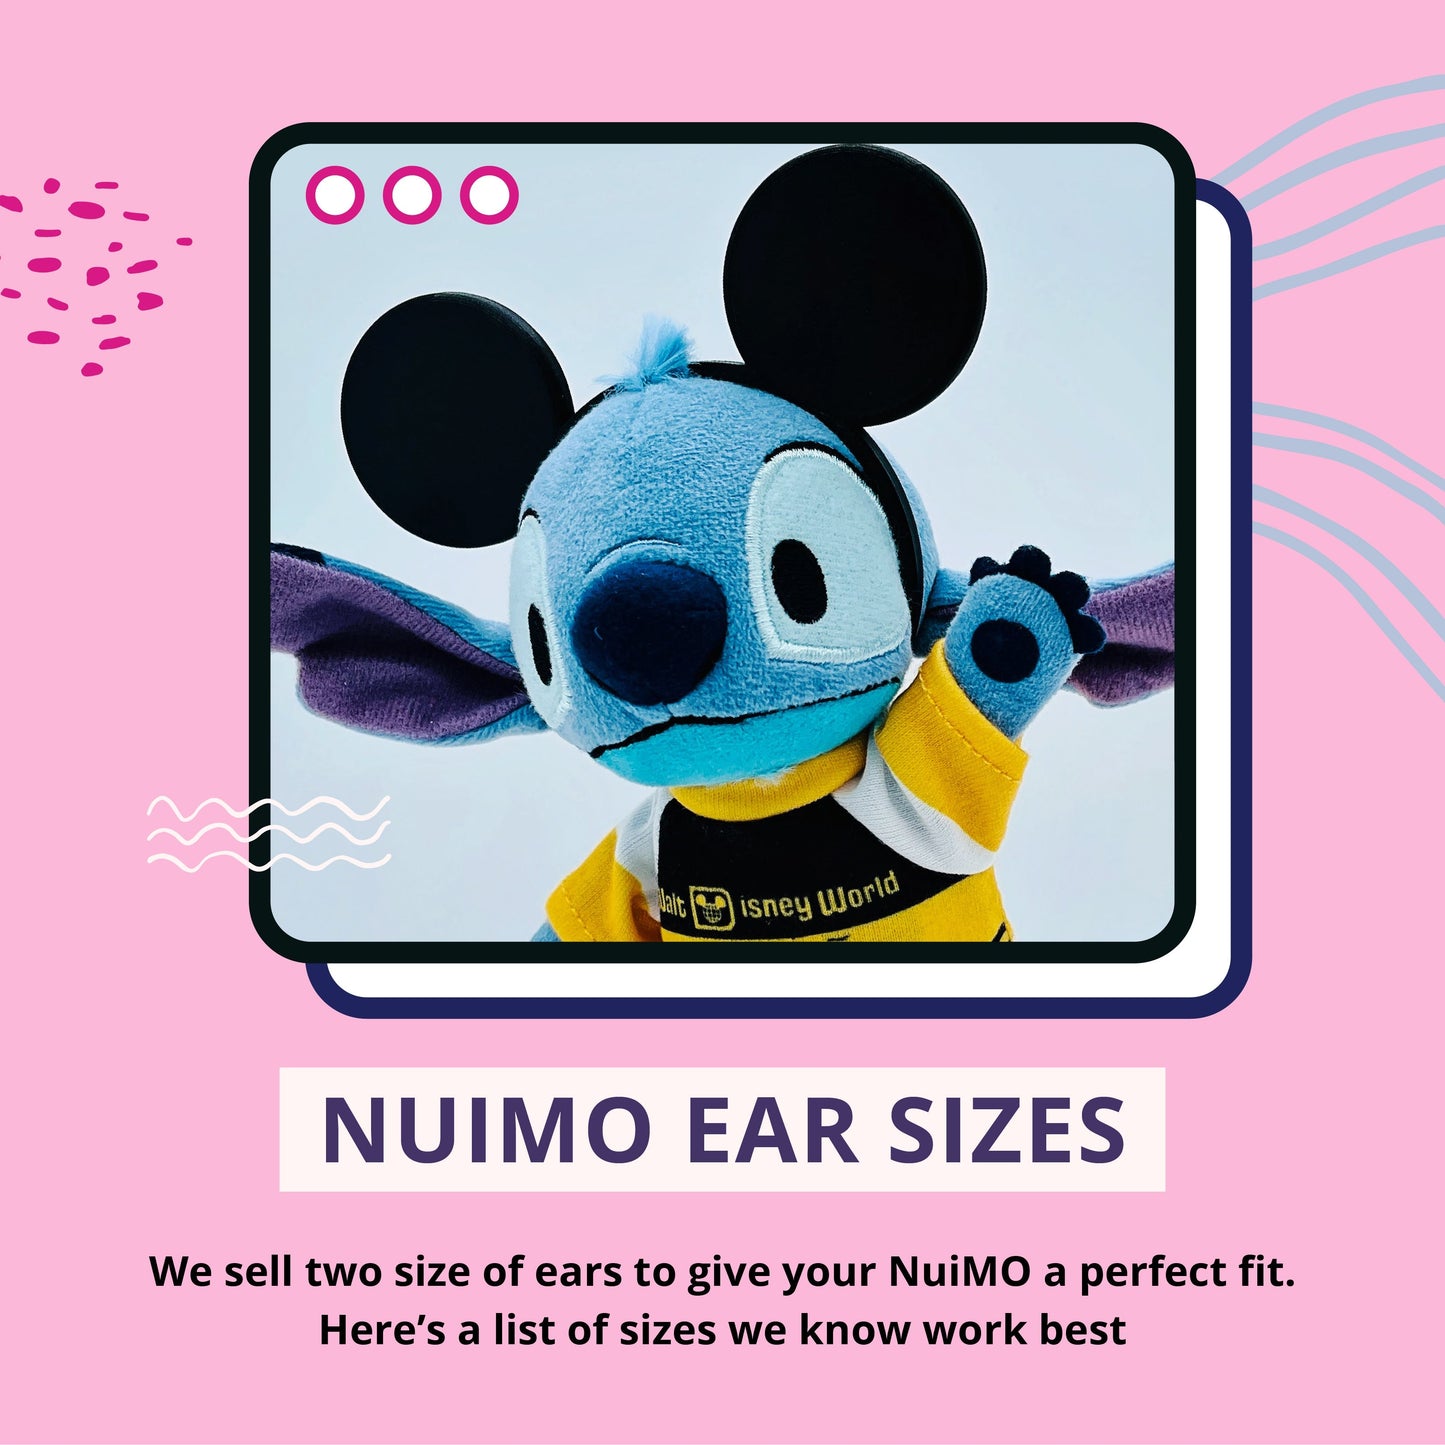 Nightmare Before Christmas Themed Ears for NuiMO Plushes